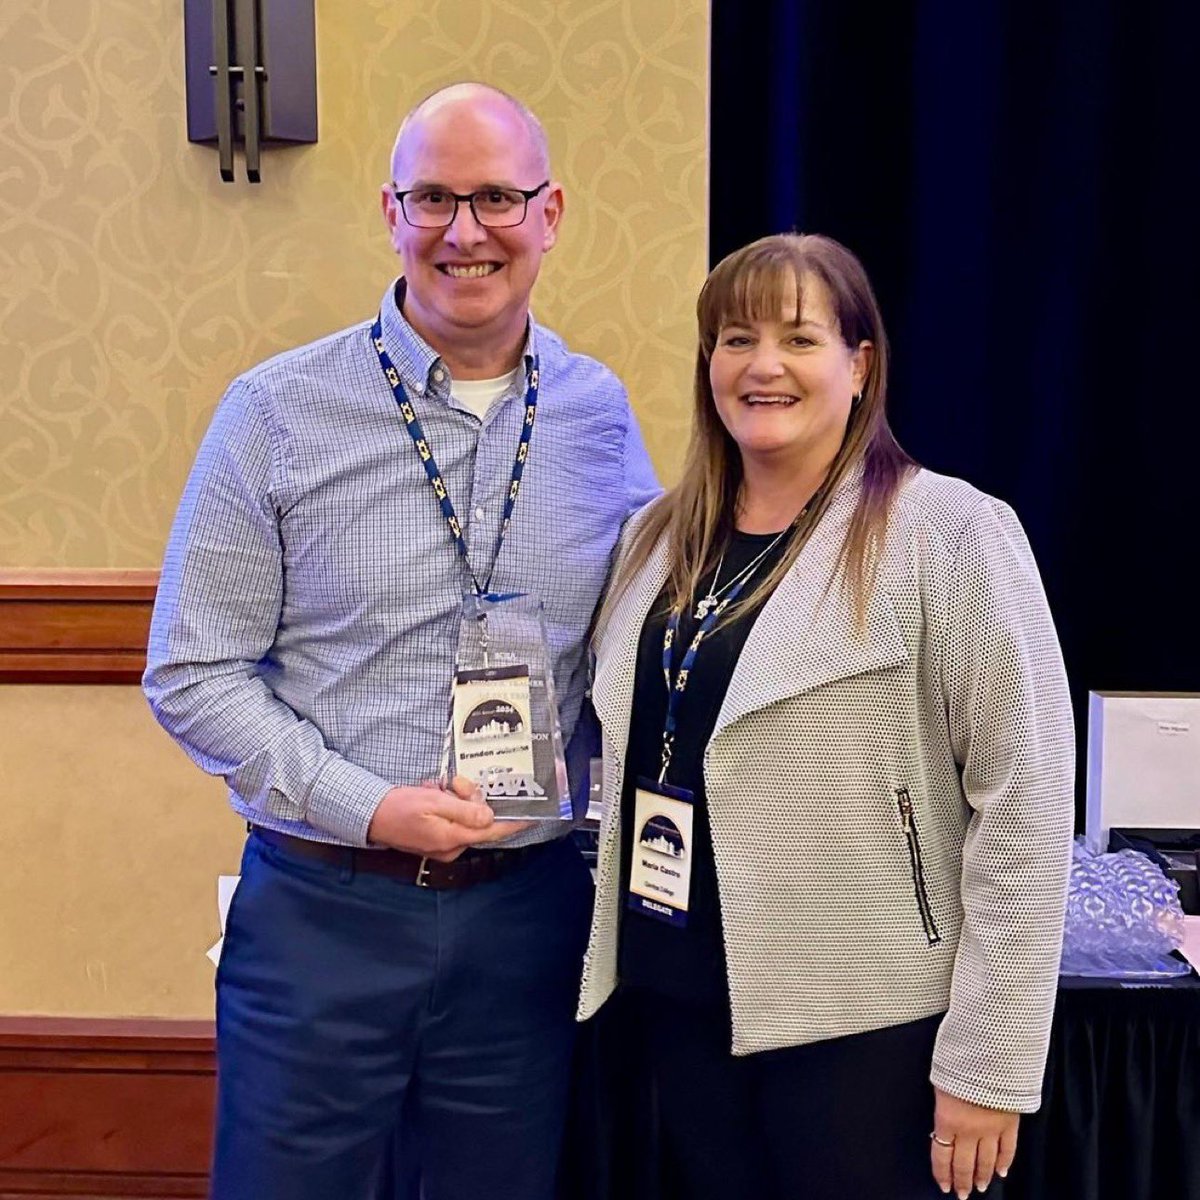 We are excited to celebrate Brandon Johnson as our 3C2A Athletic Trainer of the Year! Brandon, from Sierra College, guided us through COVID as our 3CATA President & was the founding chair & continued member of our EDI committee. Thank you Brandon for all your work! Congrats!